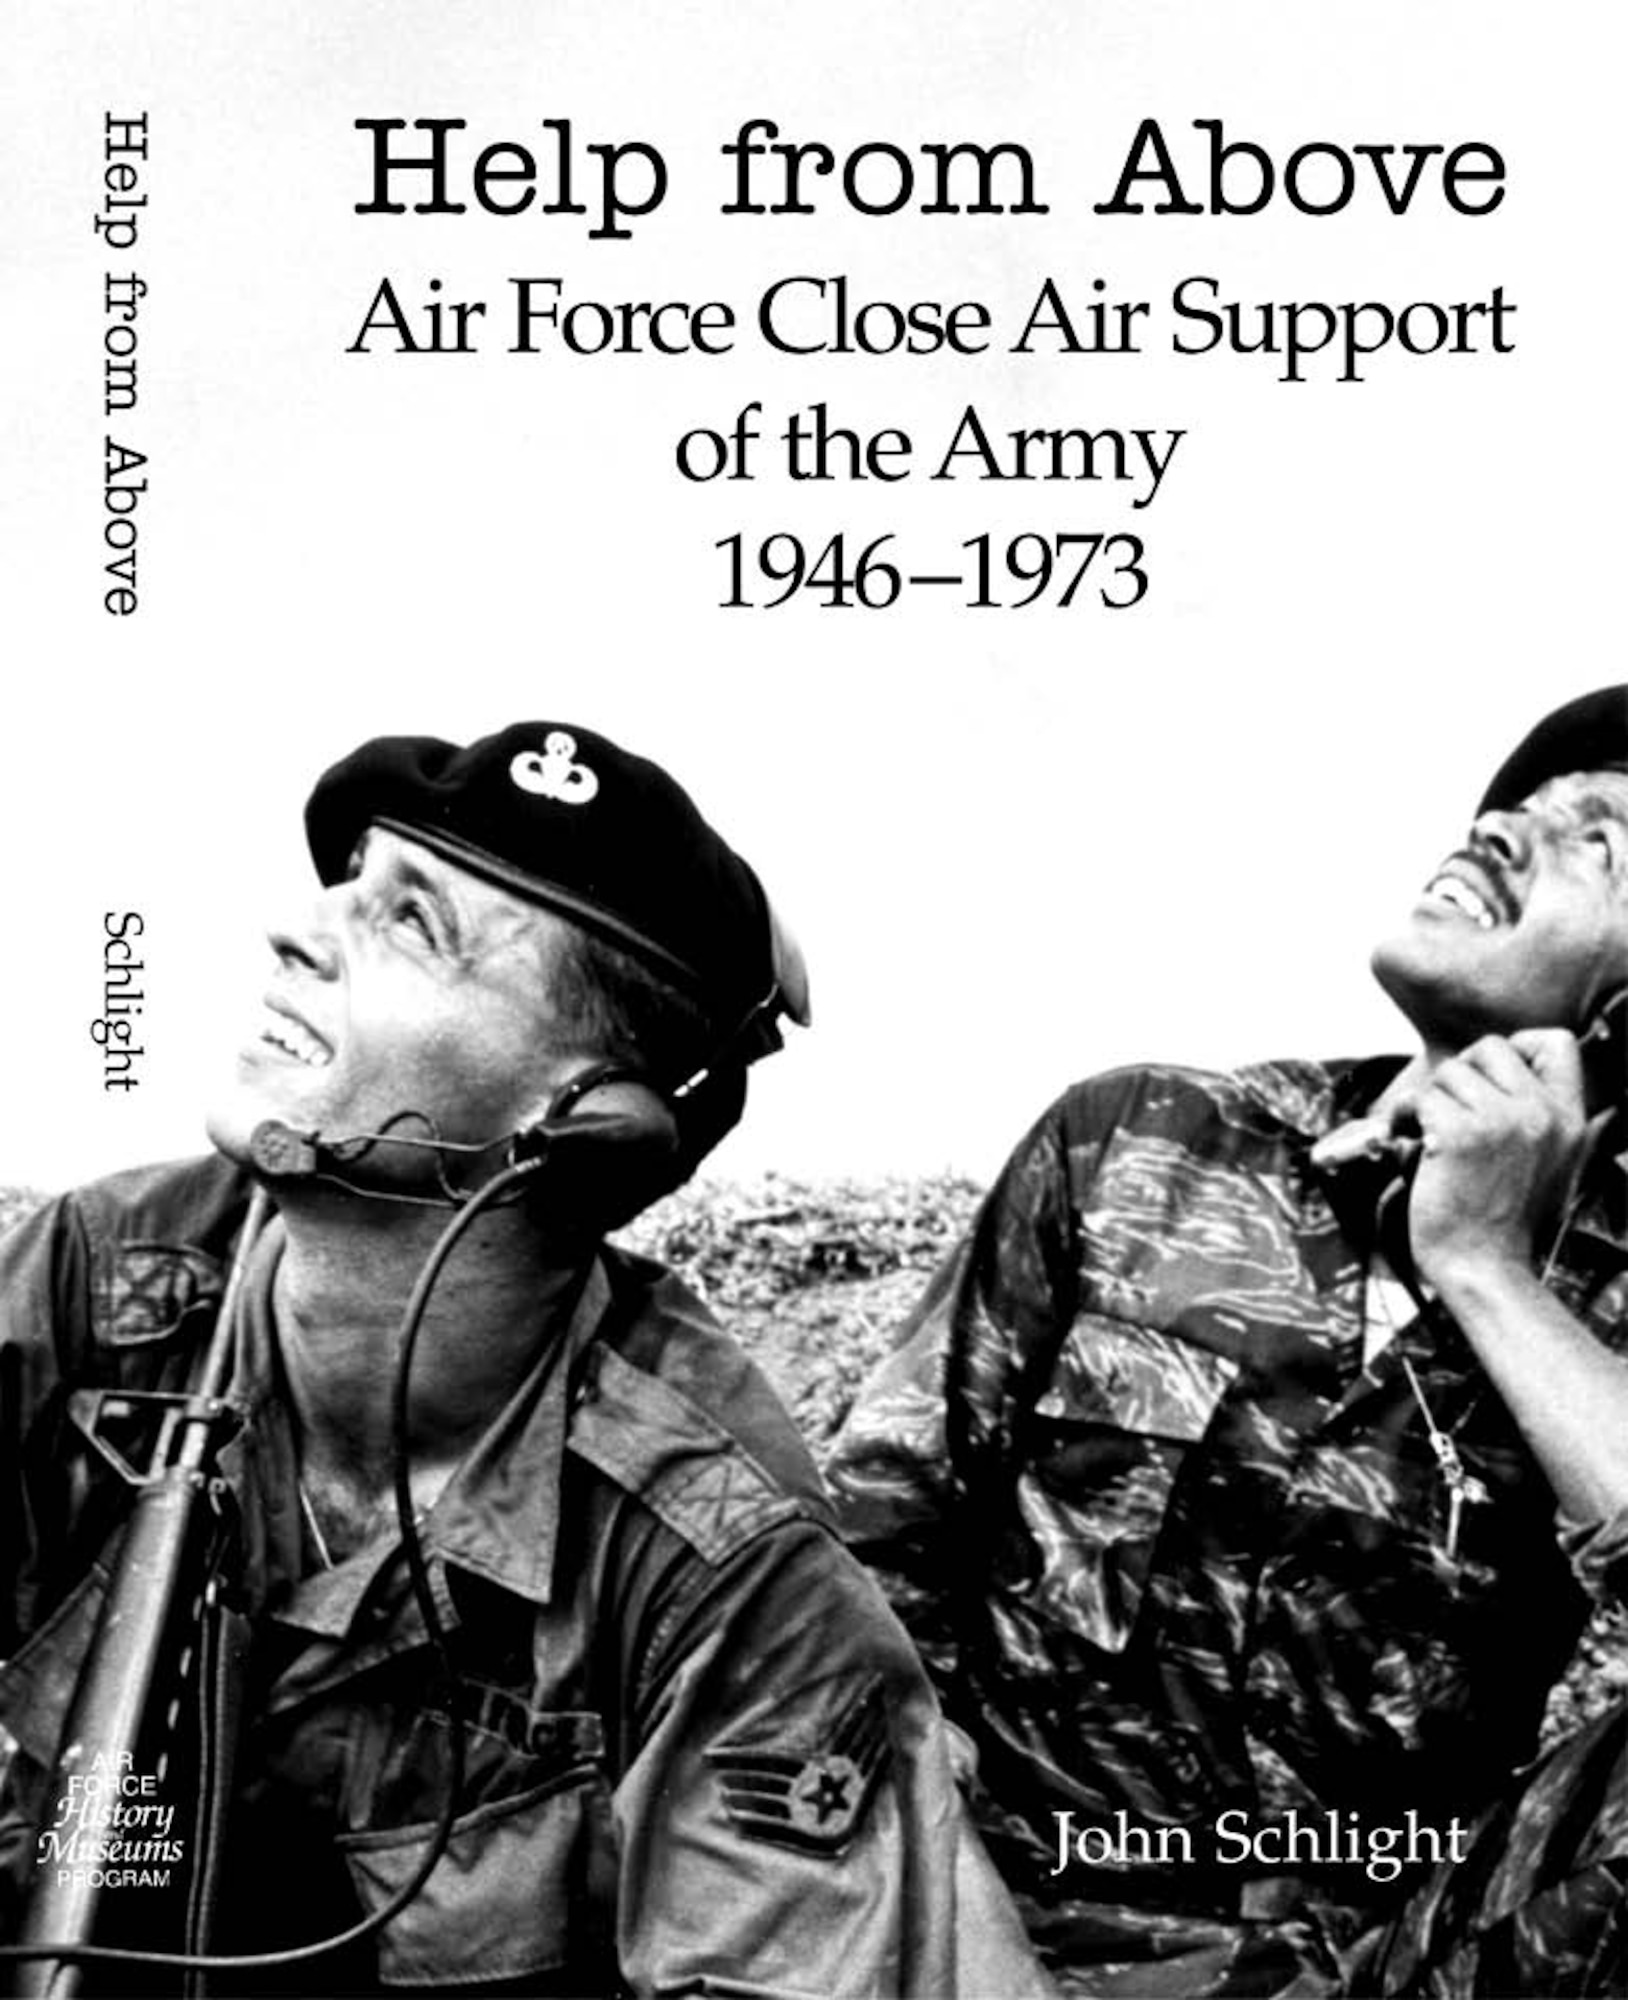 The issue of close air support by the USAF in support of, primarily, the US Army has been fractious for years. Air commanders have clashed with ground leaders over the proper use of aircraft in support of ground operations. Close air support remains a critical mission today and the lessons of yesterday should not be ignored.